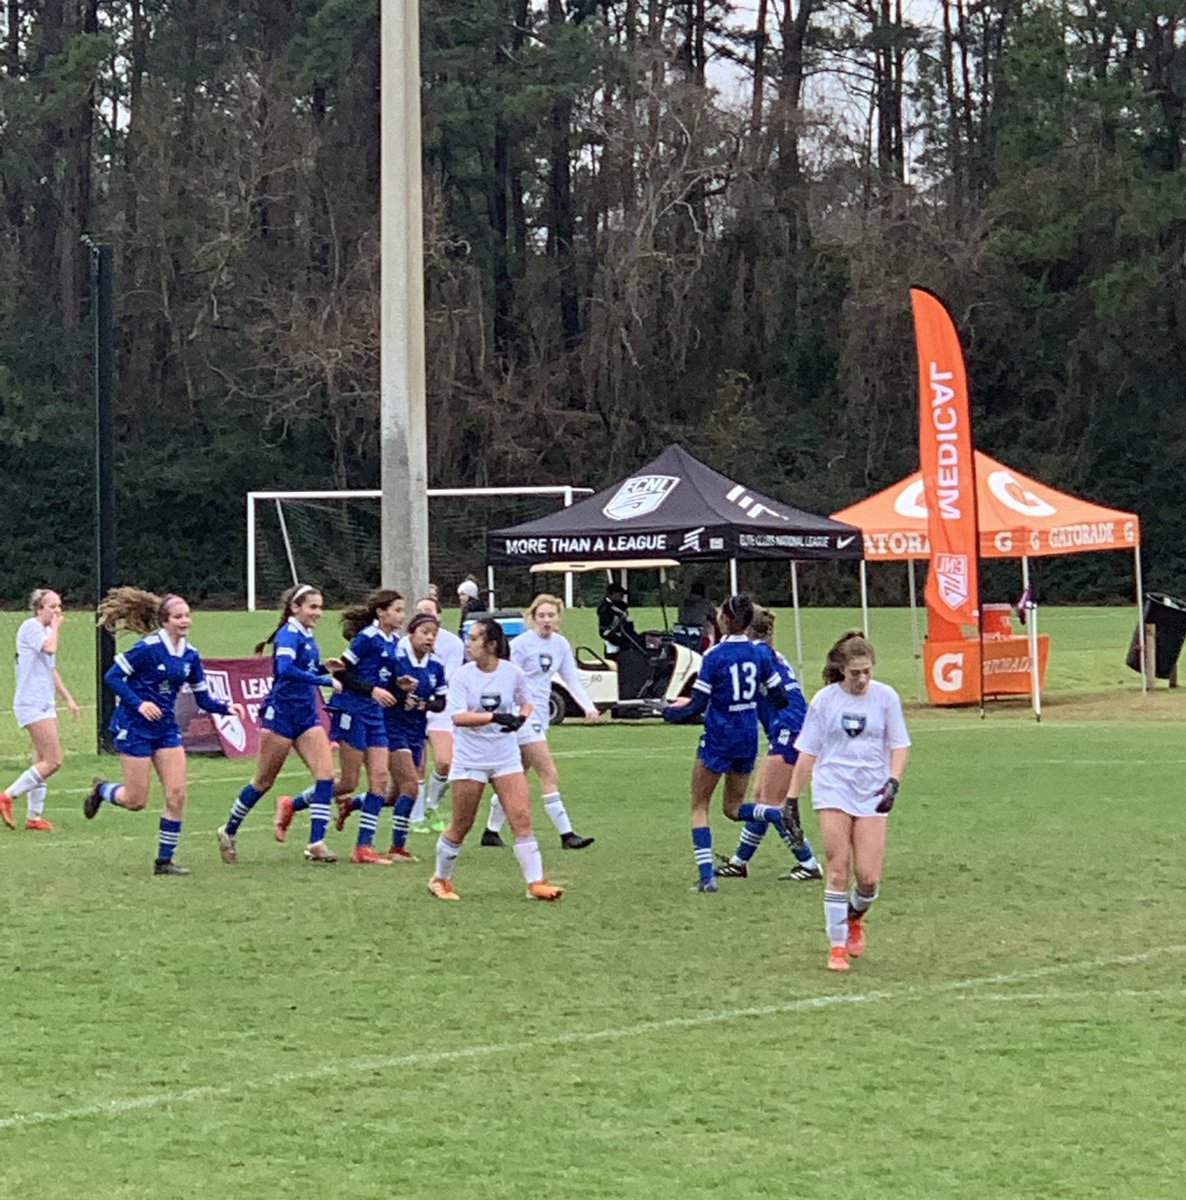 A thrilling #ECNLHou match this morning - just ran out of time. @SportingIowa scored w/five seconds left to win the hard-fought match 2-1. Alexia continued her strong play w/a superb goal off a corner kick. Next up is a 10 a.m. match tomorrow vs. Liverpool IA Michigan. #SomosCE